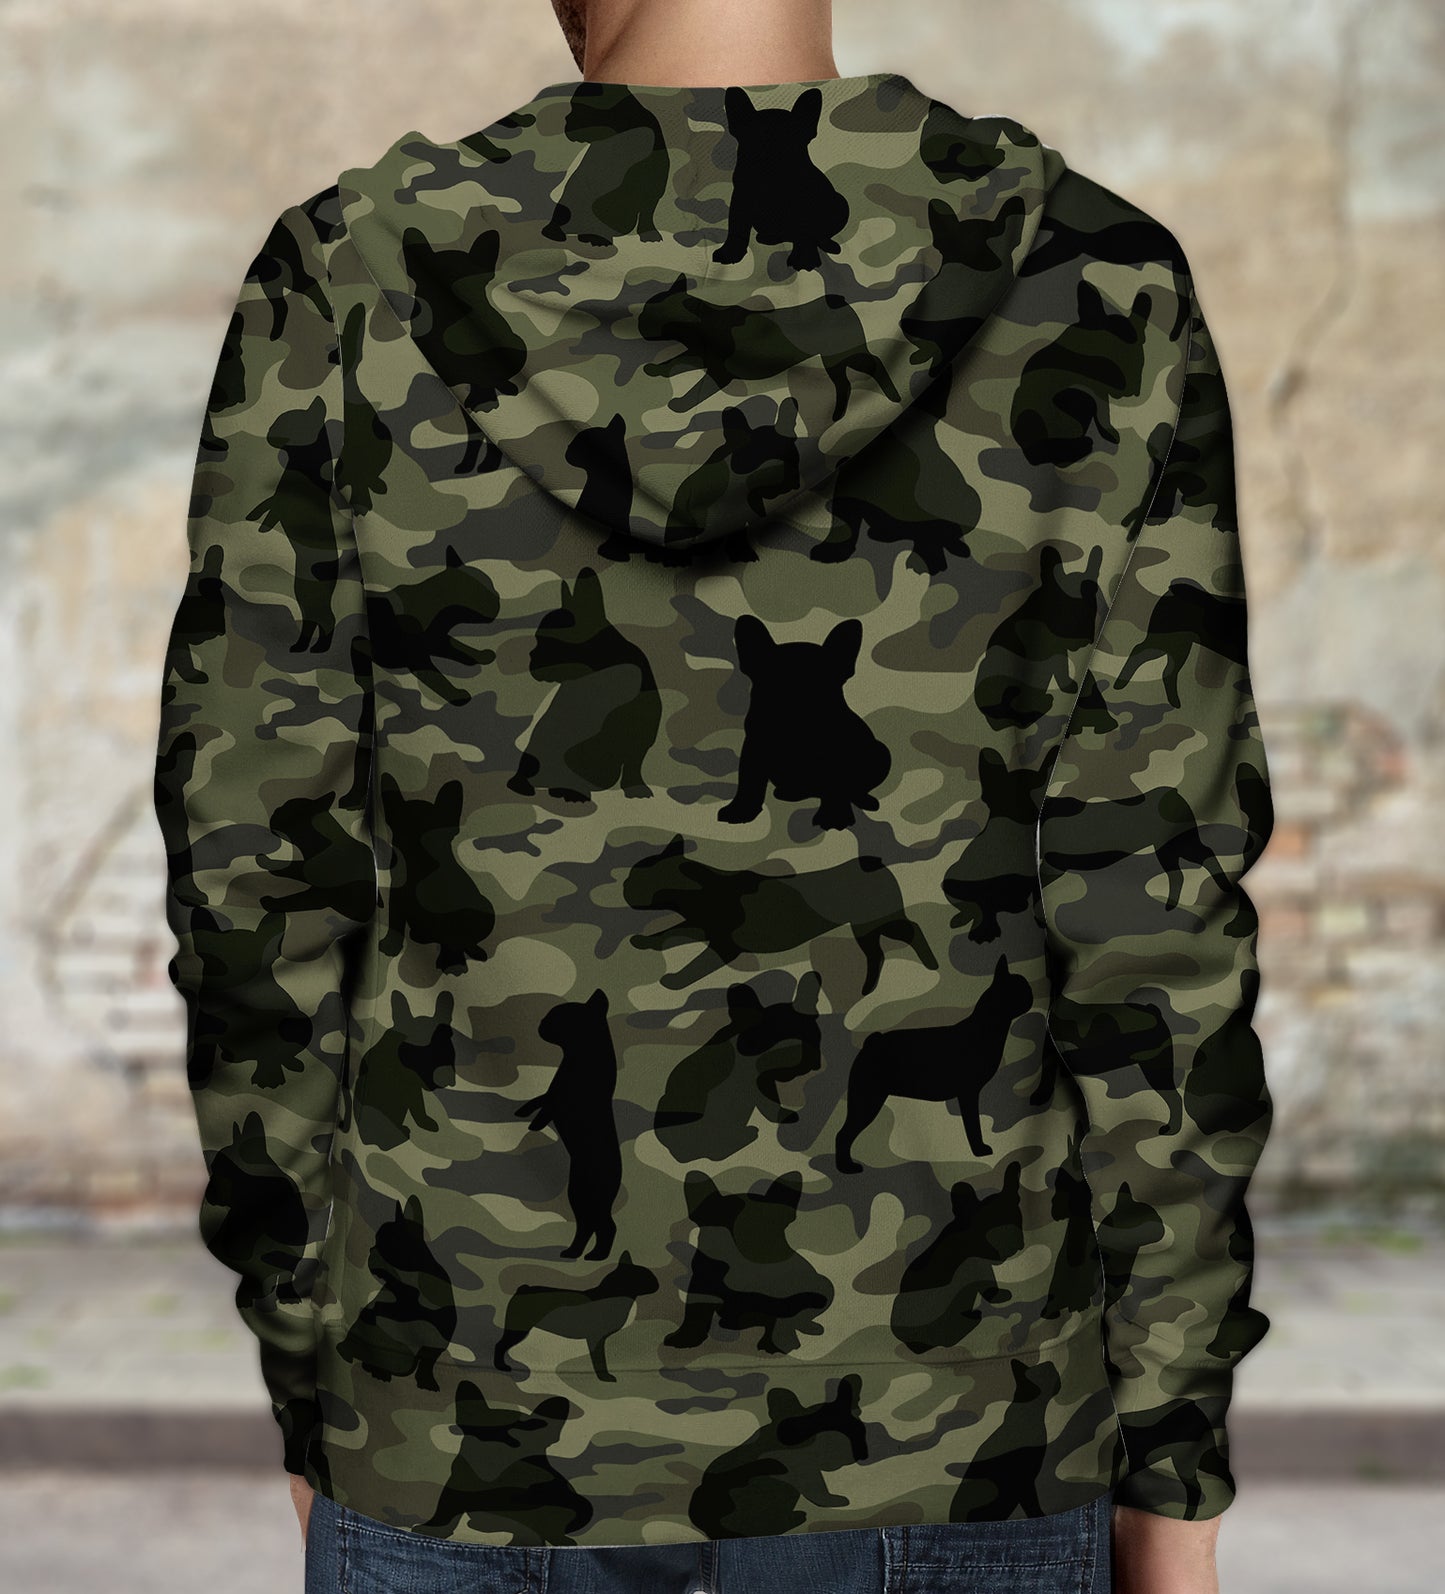 Street Style With French Bulldog Camo Hoodie V1